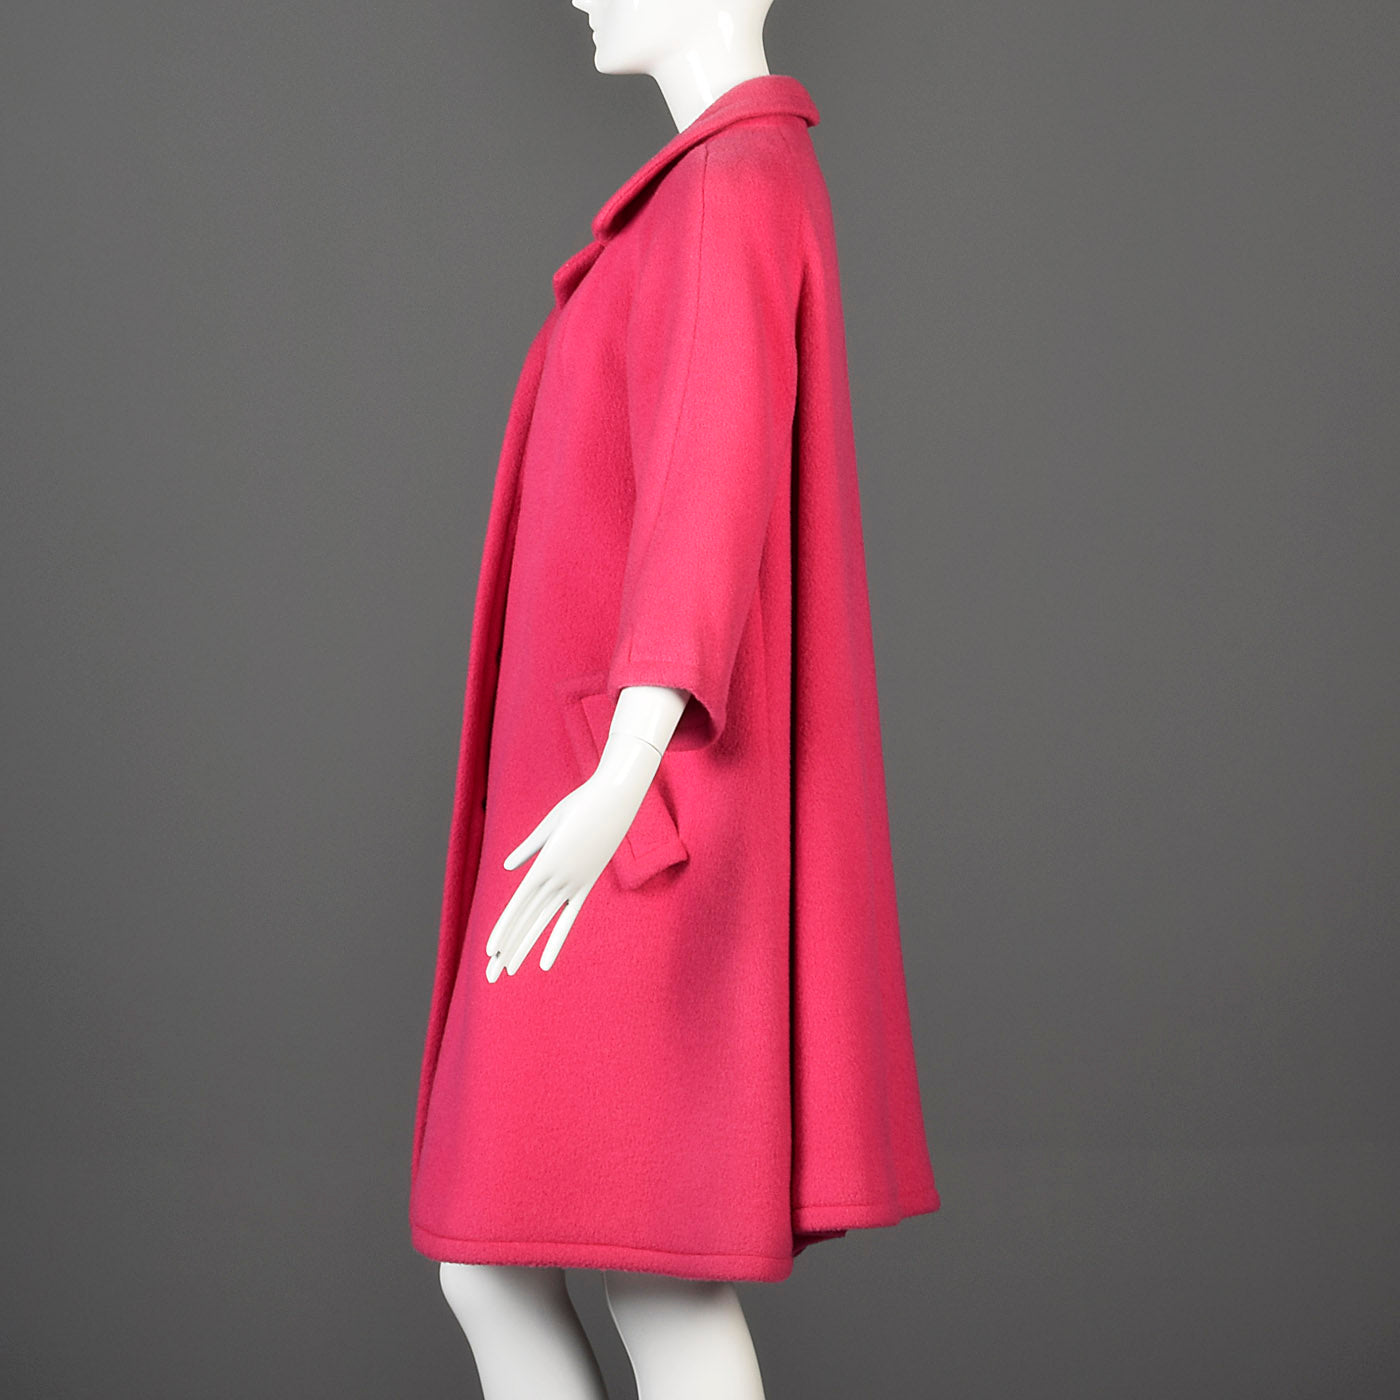 1950s Pink Wool Coat with Great Gold Buttons